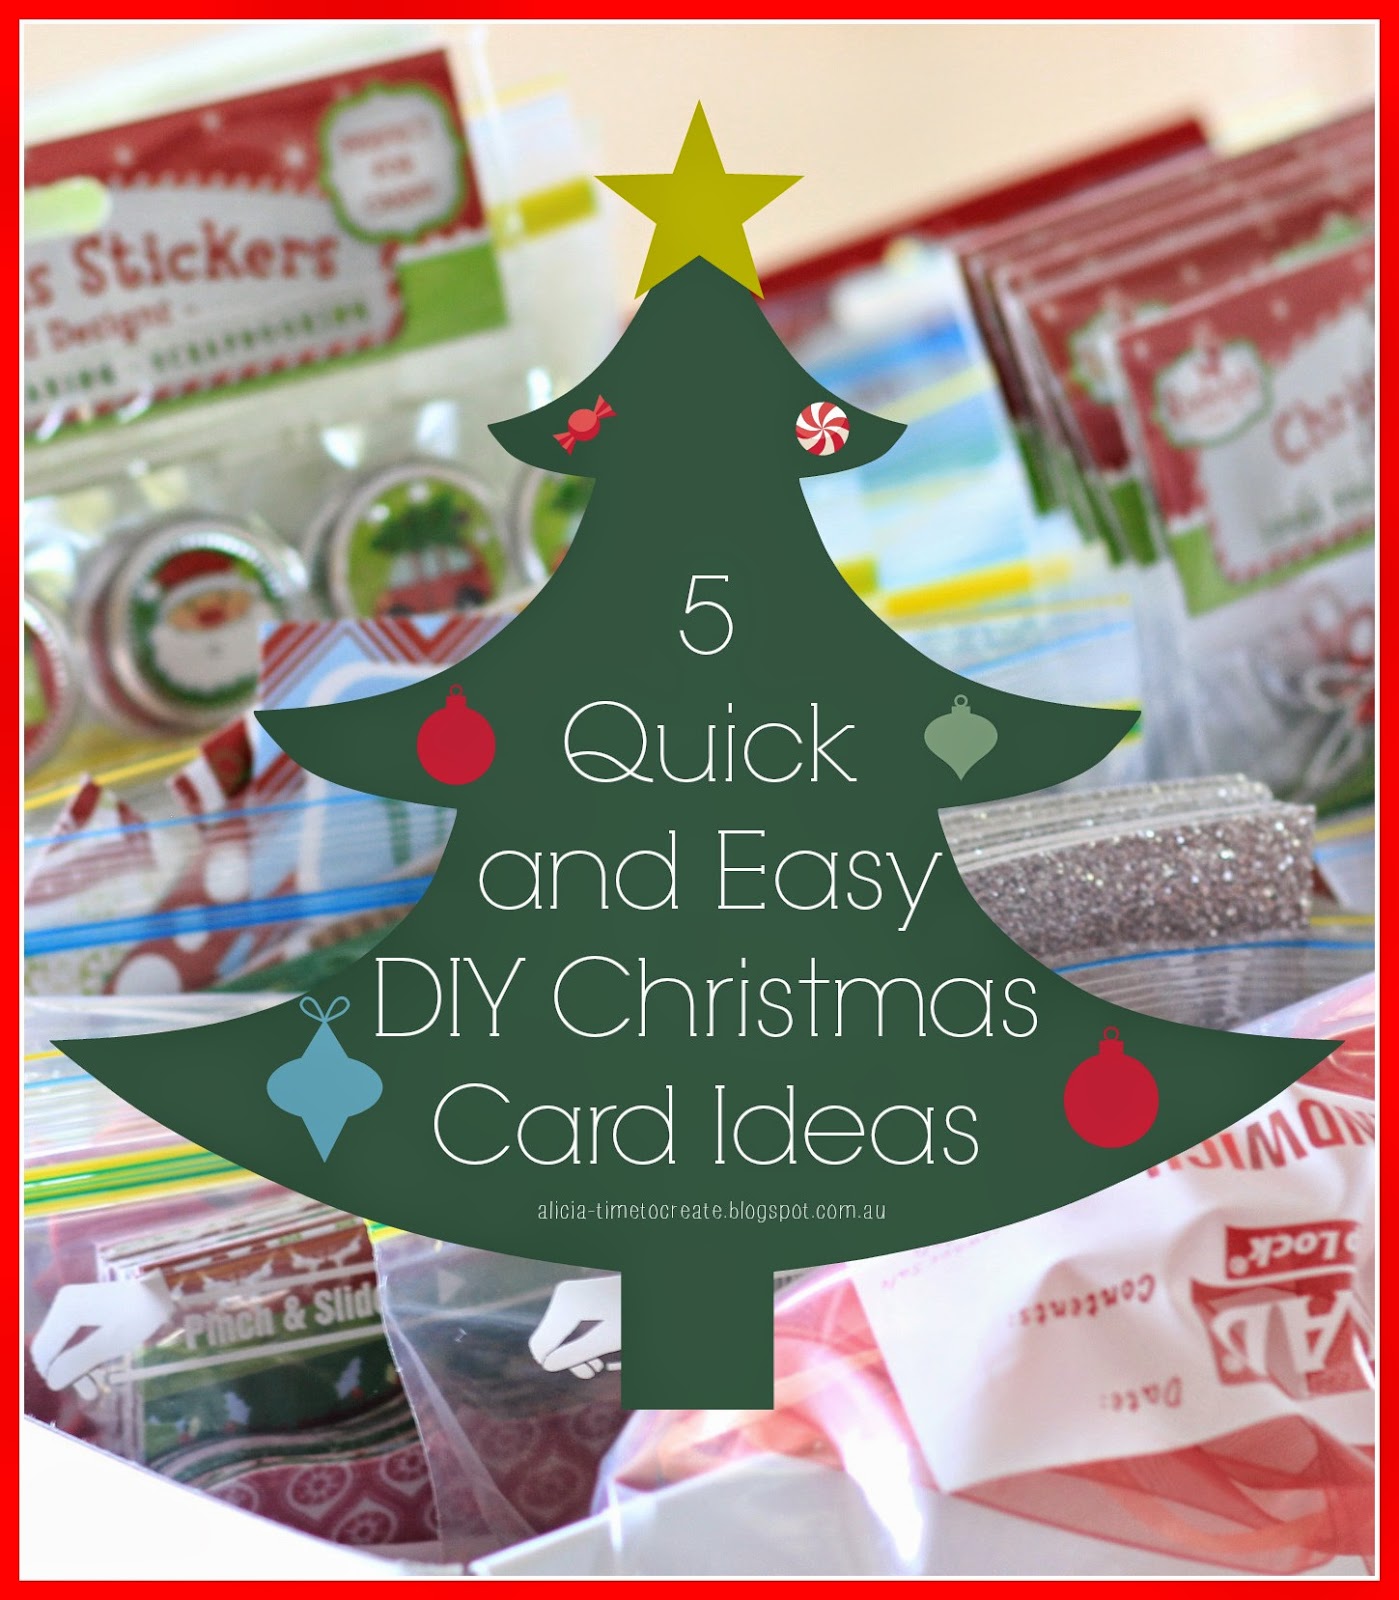 5 Quick and Easy DIY Christmas Card Ideas - Paper Craft Secrets